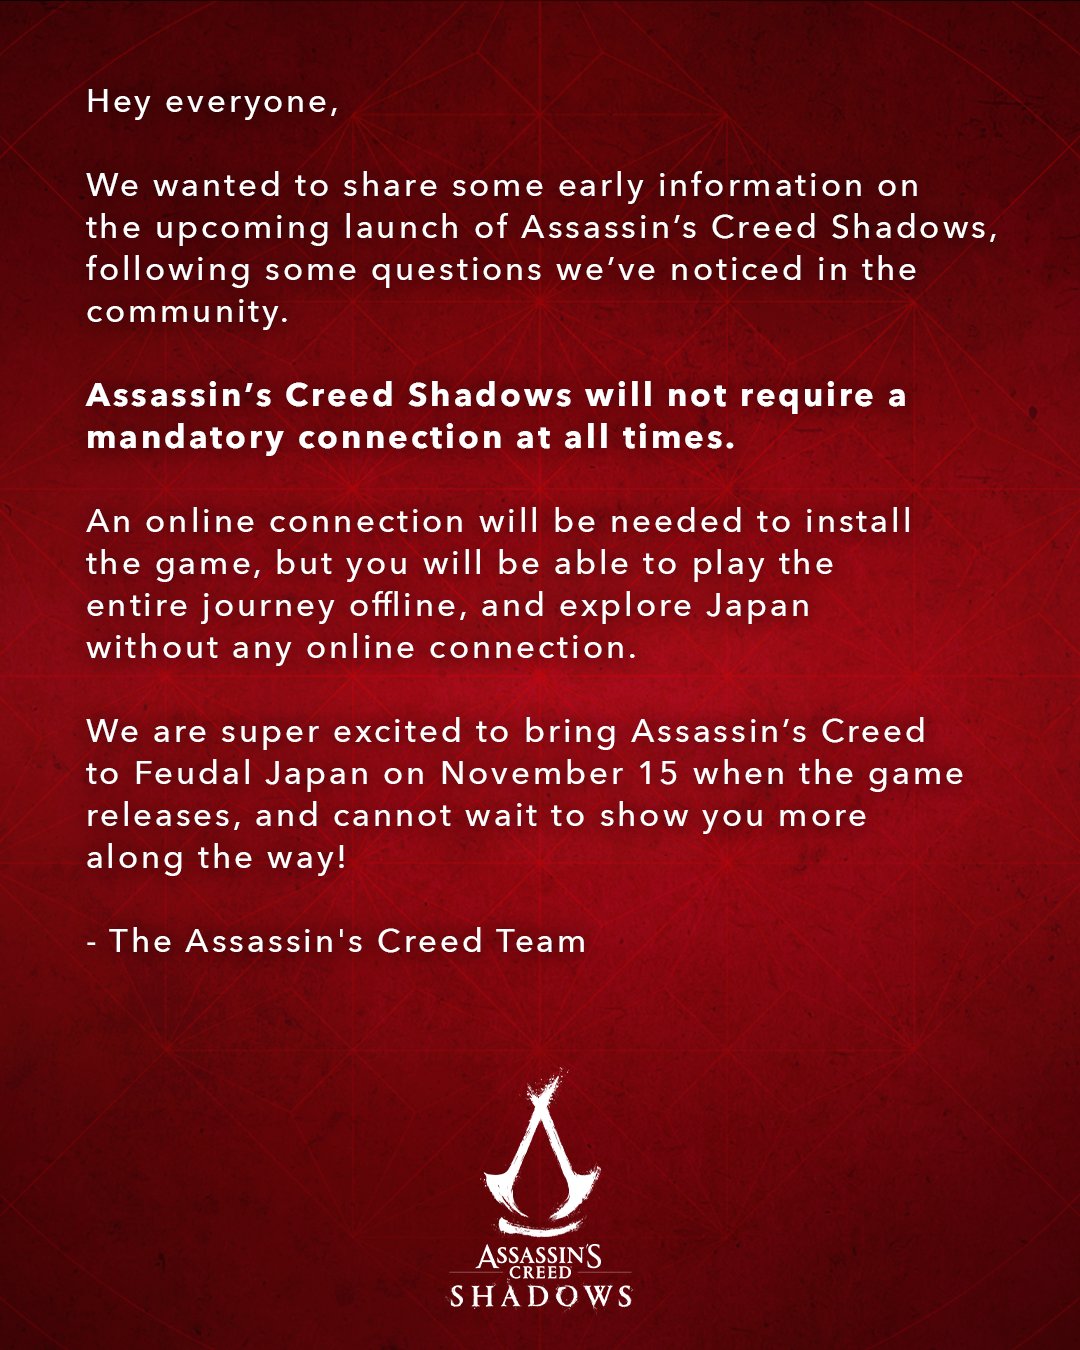  Assassin's Creed Shadows does not need an internet connection to run: 'You will be able to play the entire journey offline' 